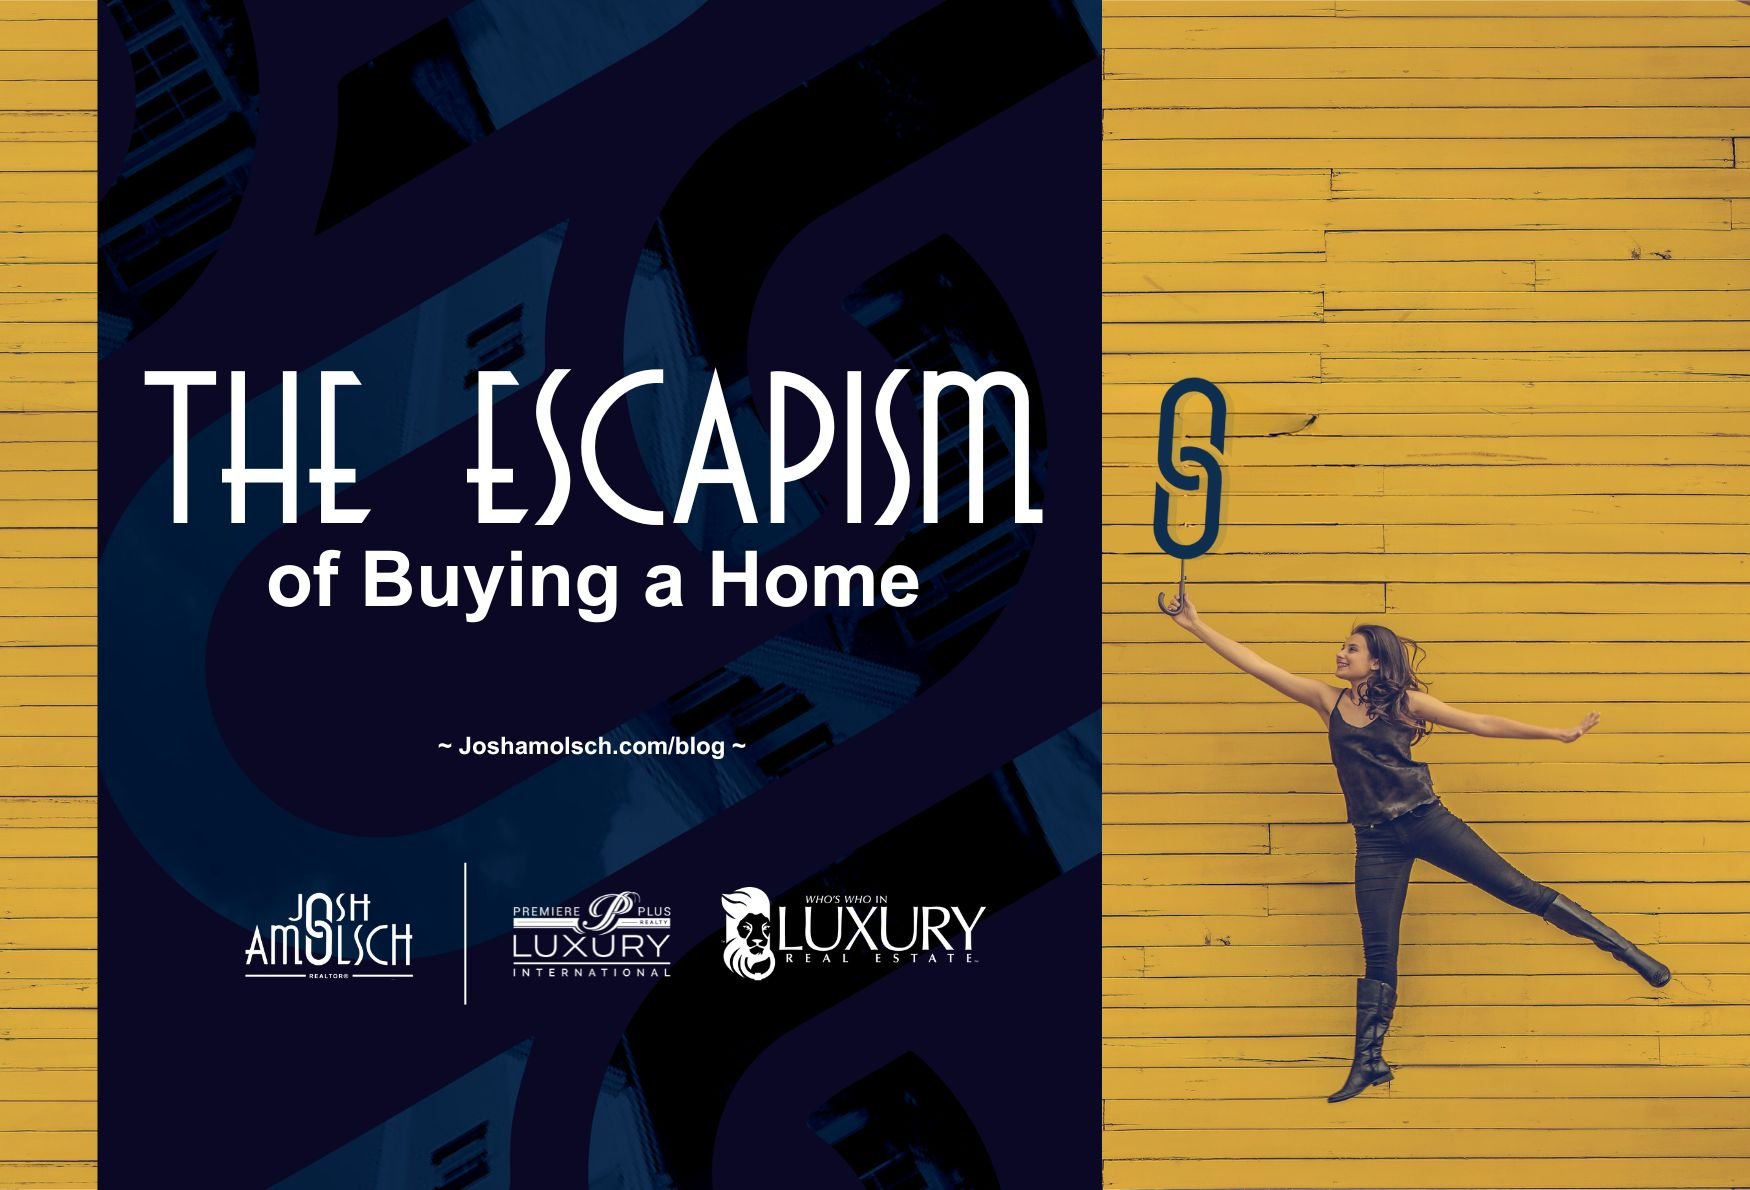 The Escapism in Buying a Home